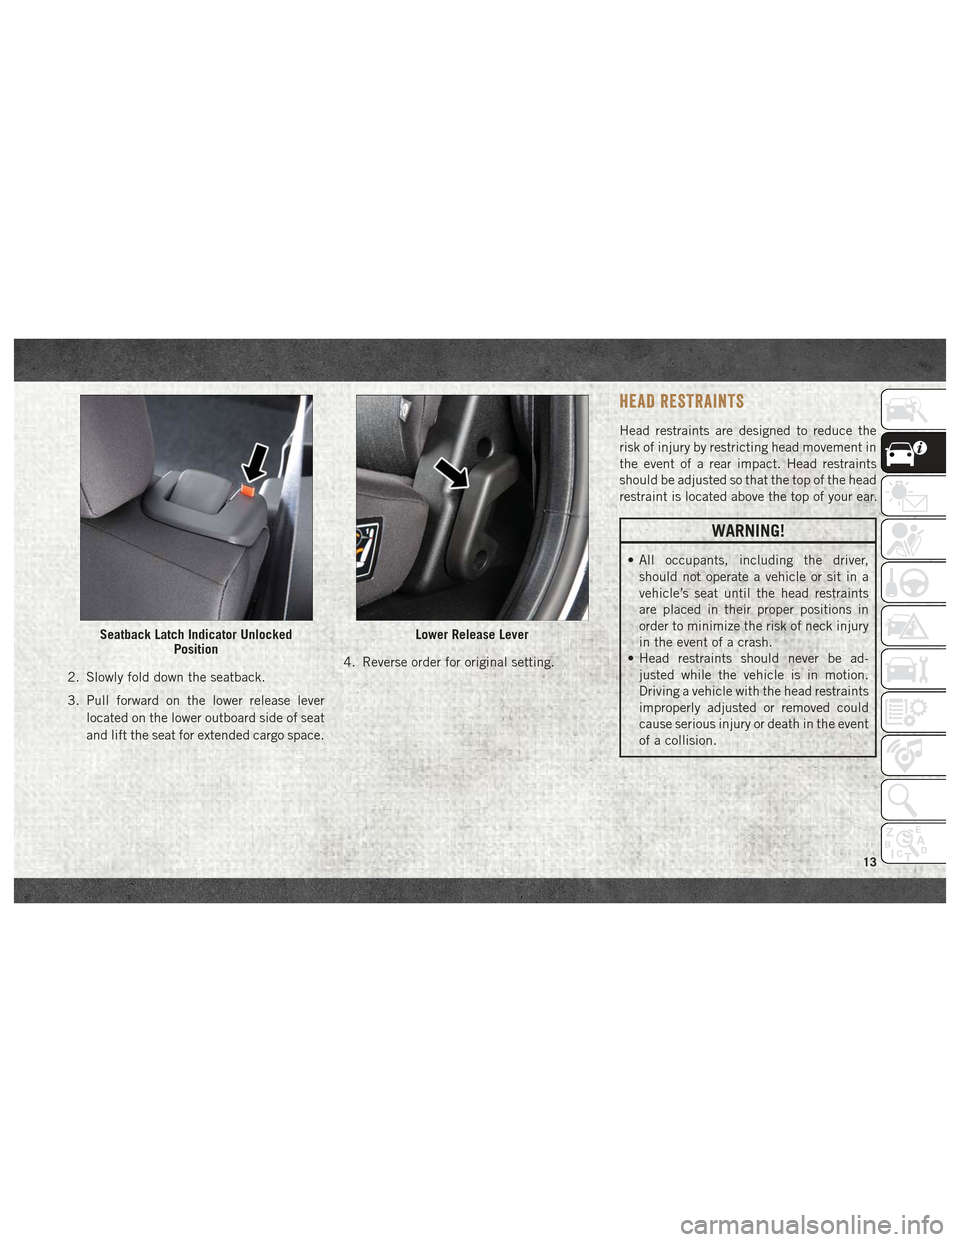 Ram ProMaster City 2018 Owners Manual 2. Slowly fold down the seatback.
3. Pull forward on the lower release leverlocated on the lower outboard side of seat
and lift the seat for extended cargo space. 4. Reverse order for original setting